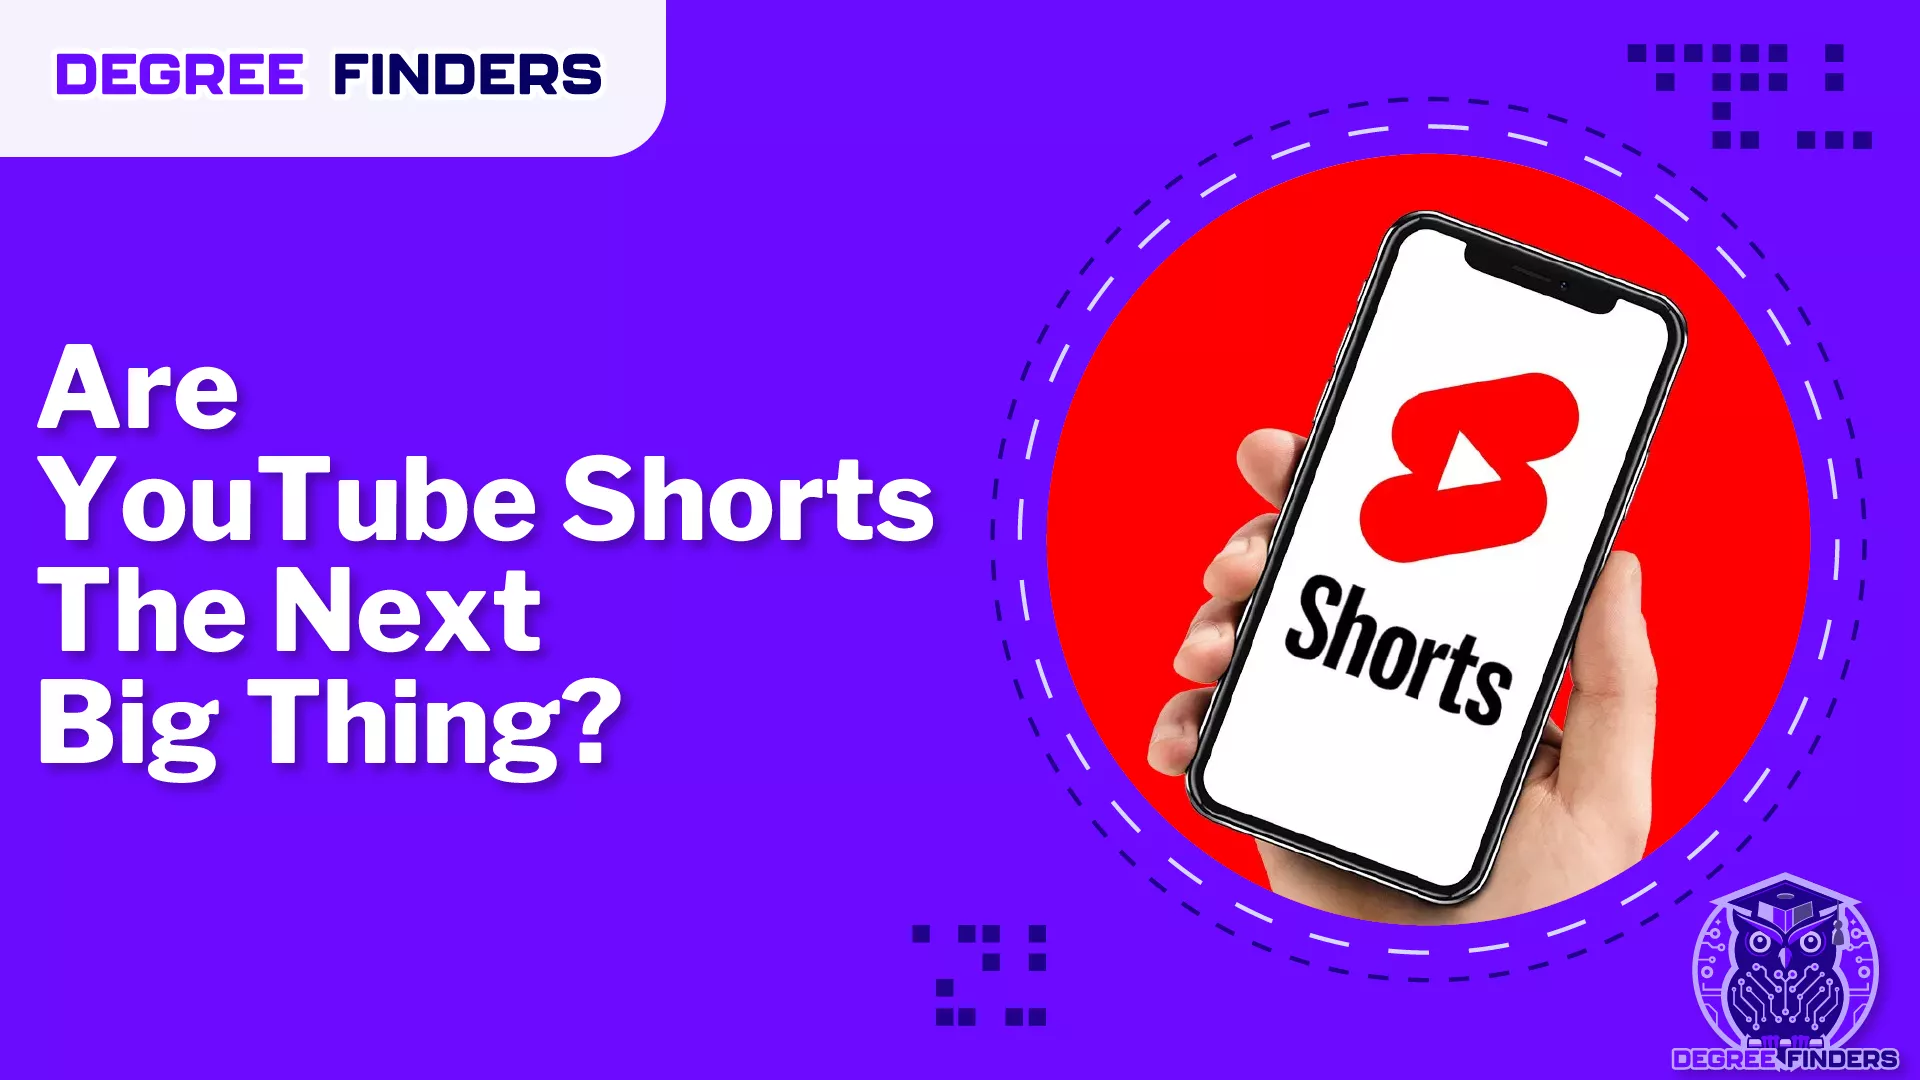 Are YouTube Shorts The Next Big Thing